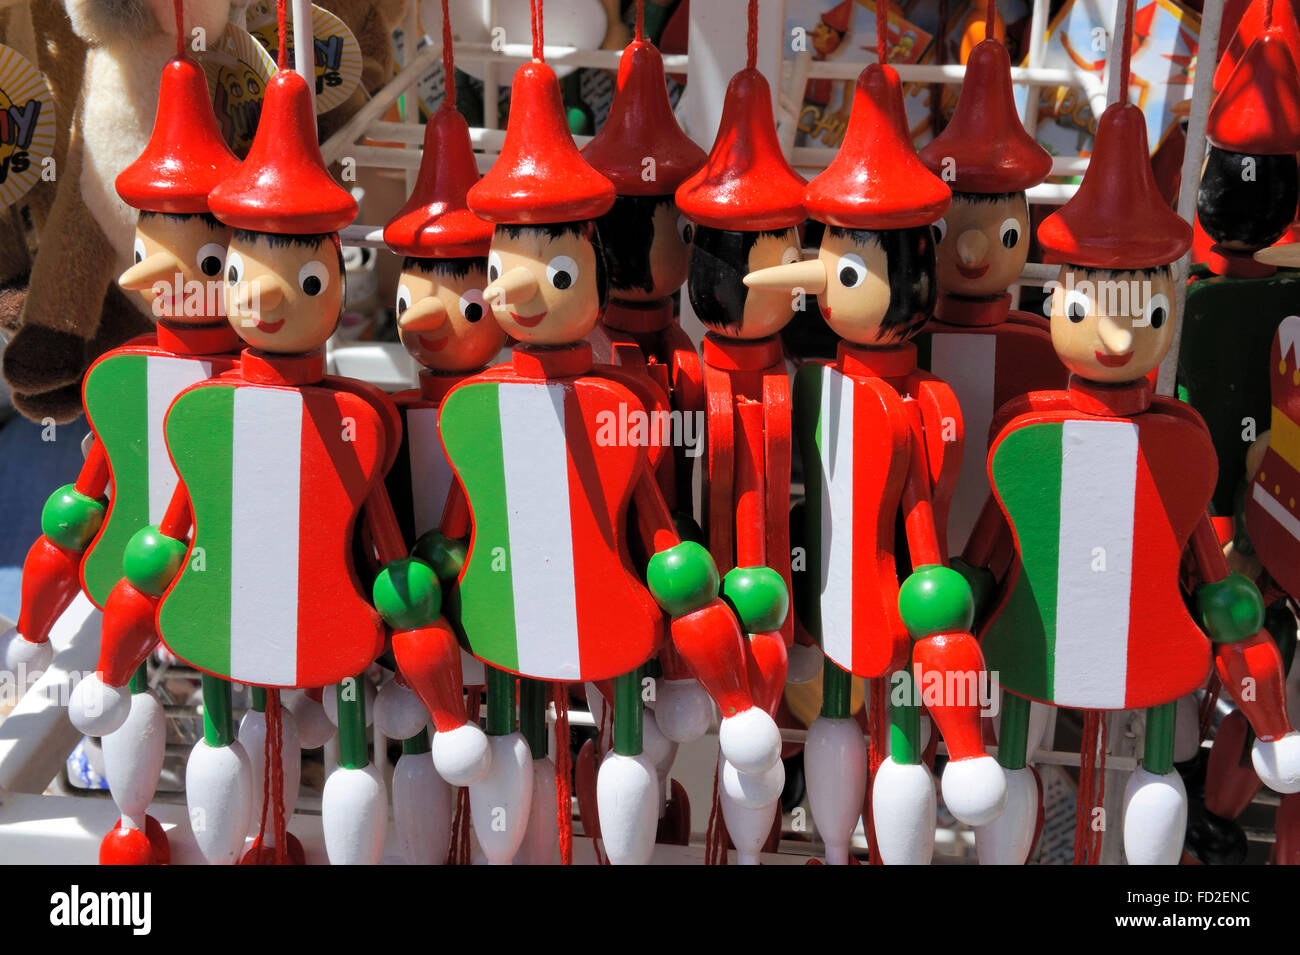 Pinocchio puppets with the Italian flag painted at their body in an Italian souvenirs shop Stock Photo